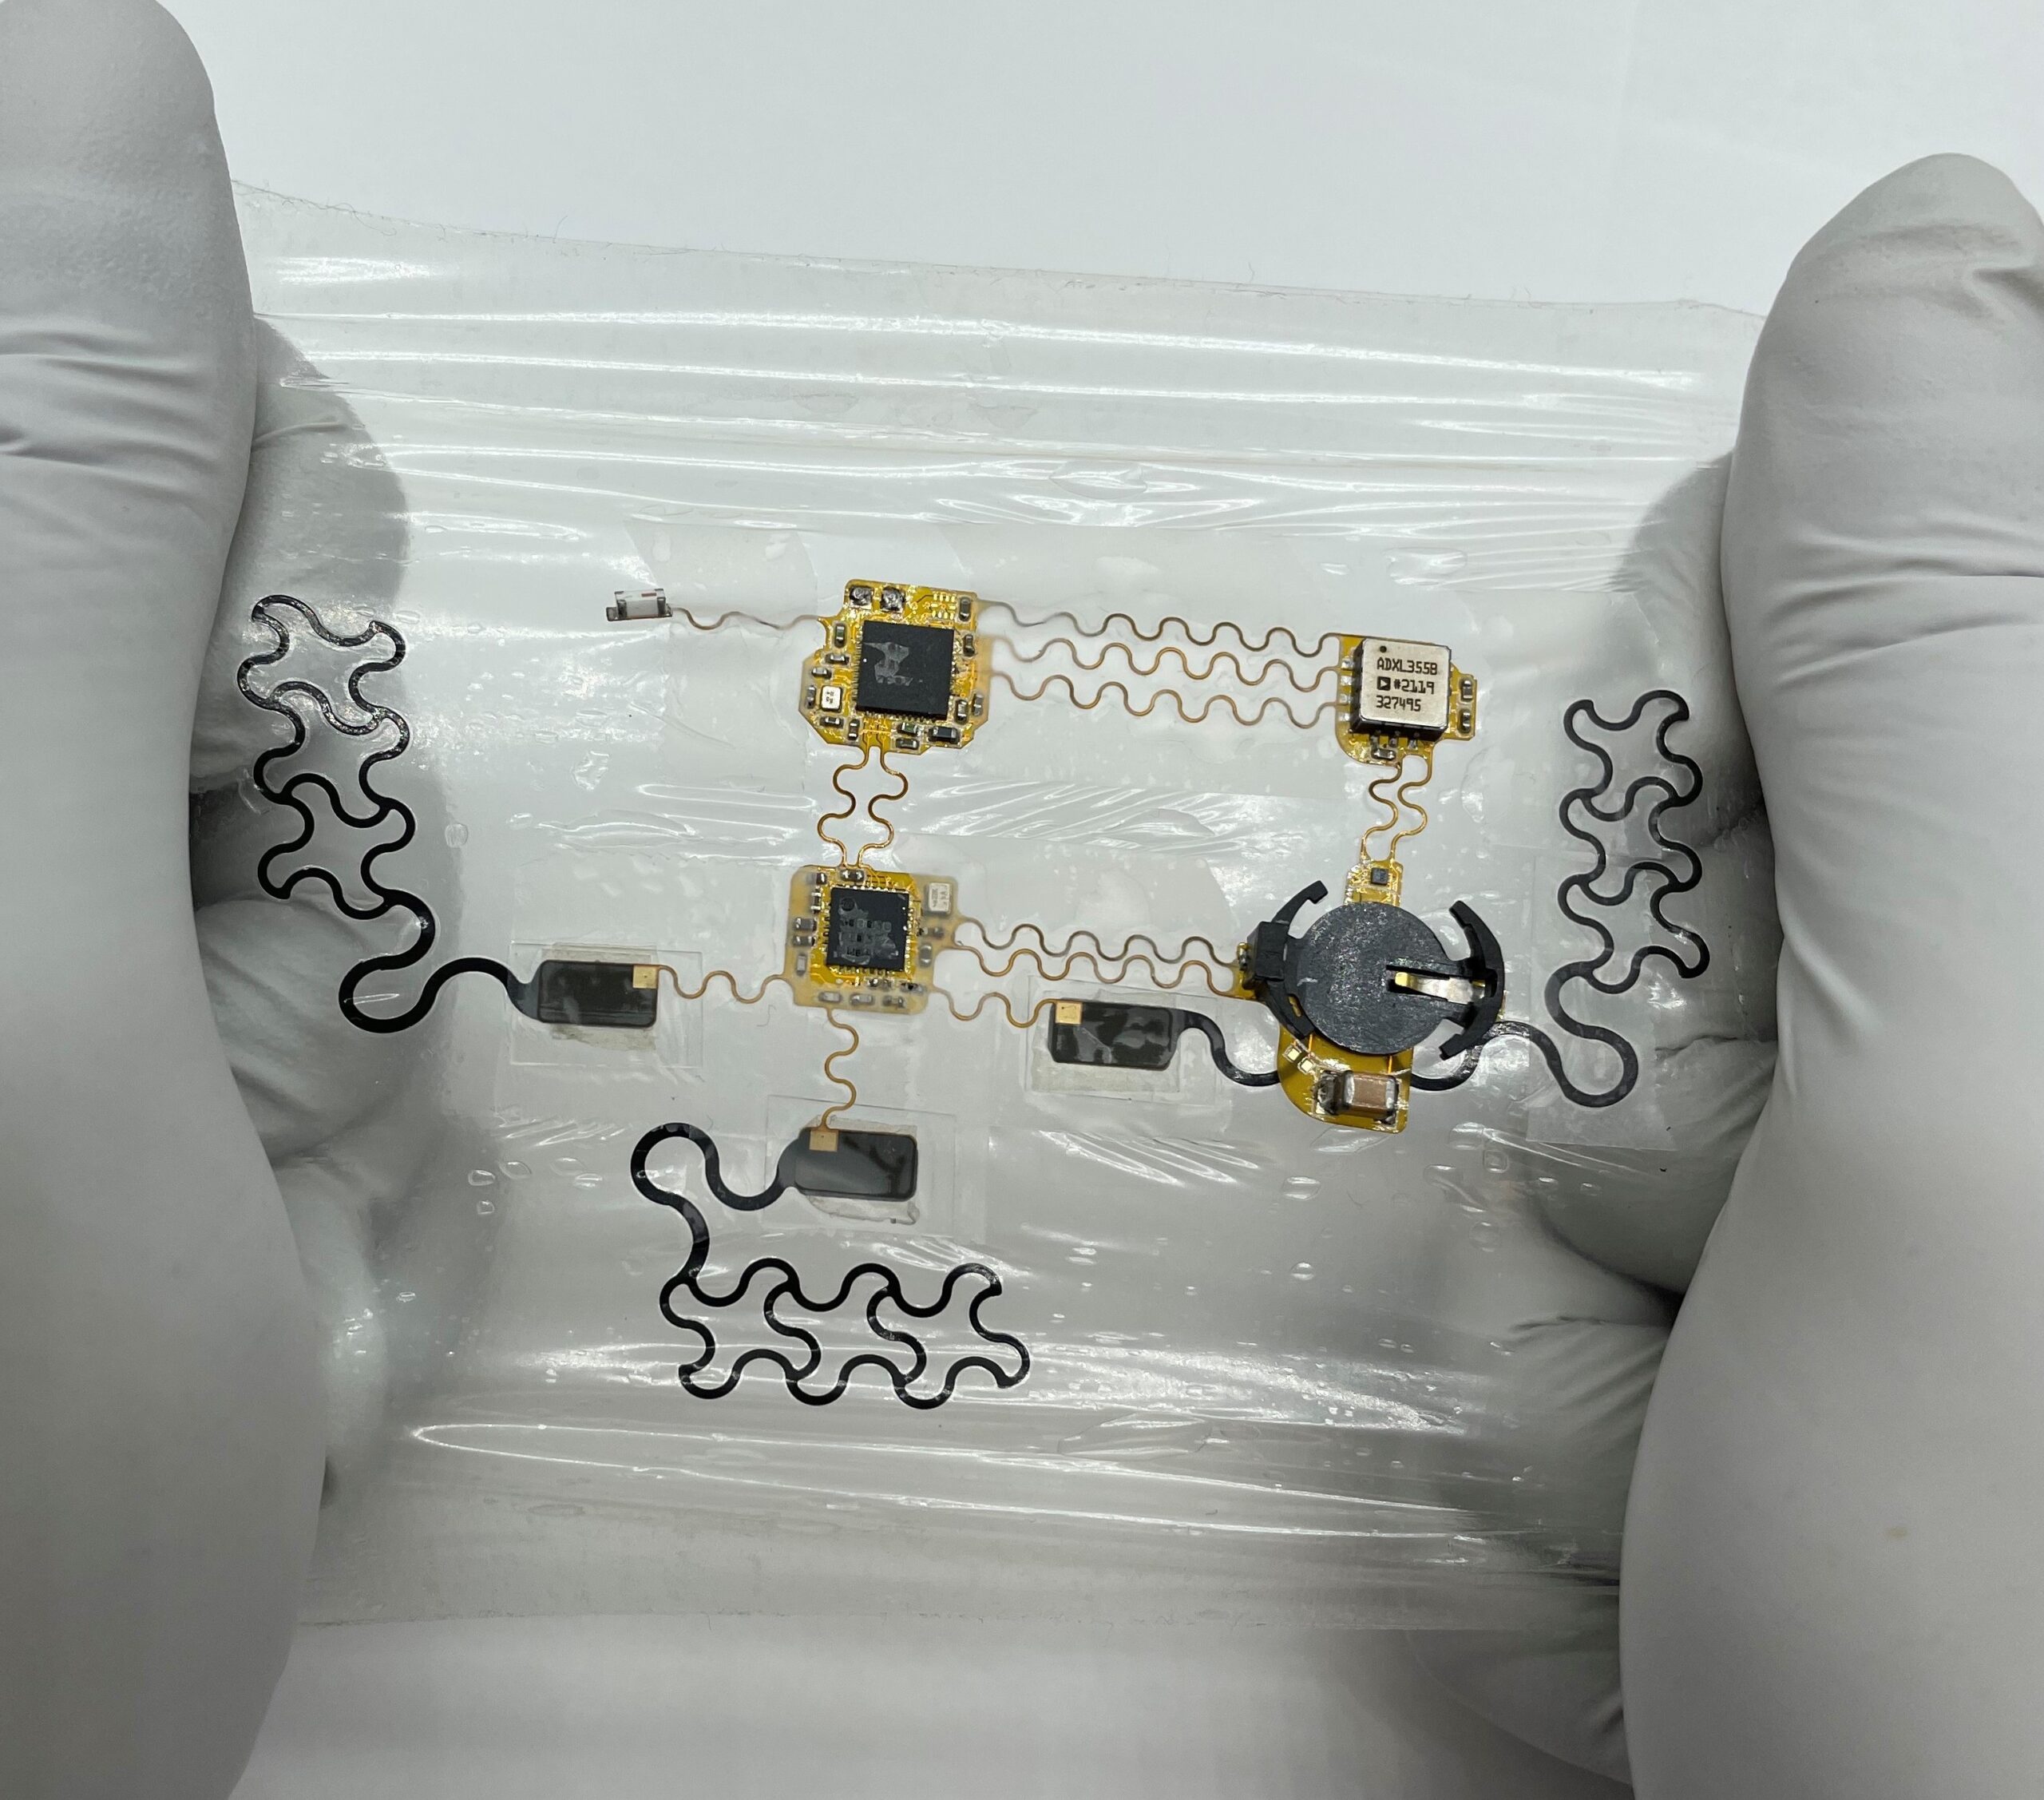 This 'electronic tattoo' from UT Austin can tell when you're stressed out